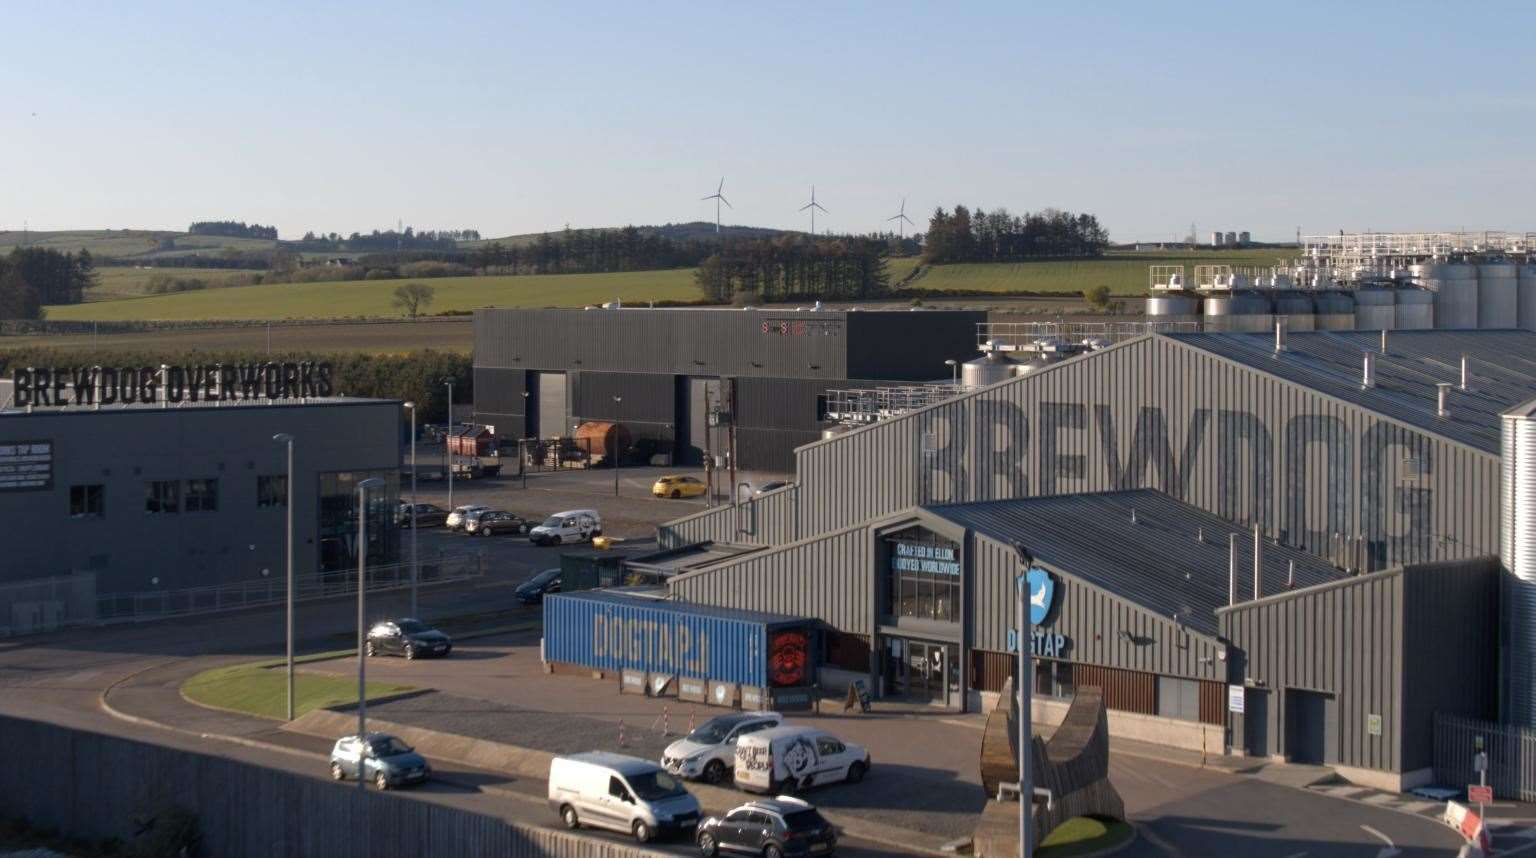 Brewdog has warned of the impact Brexit has had on UK businesses.